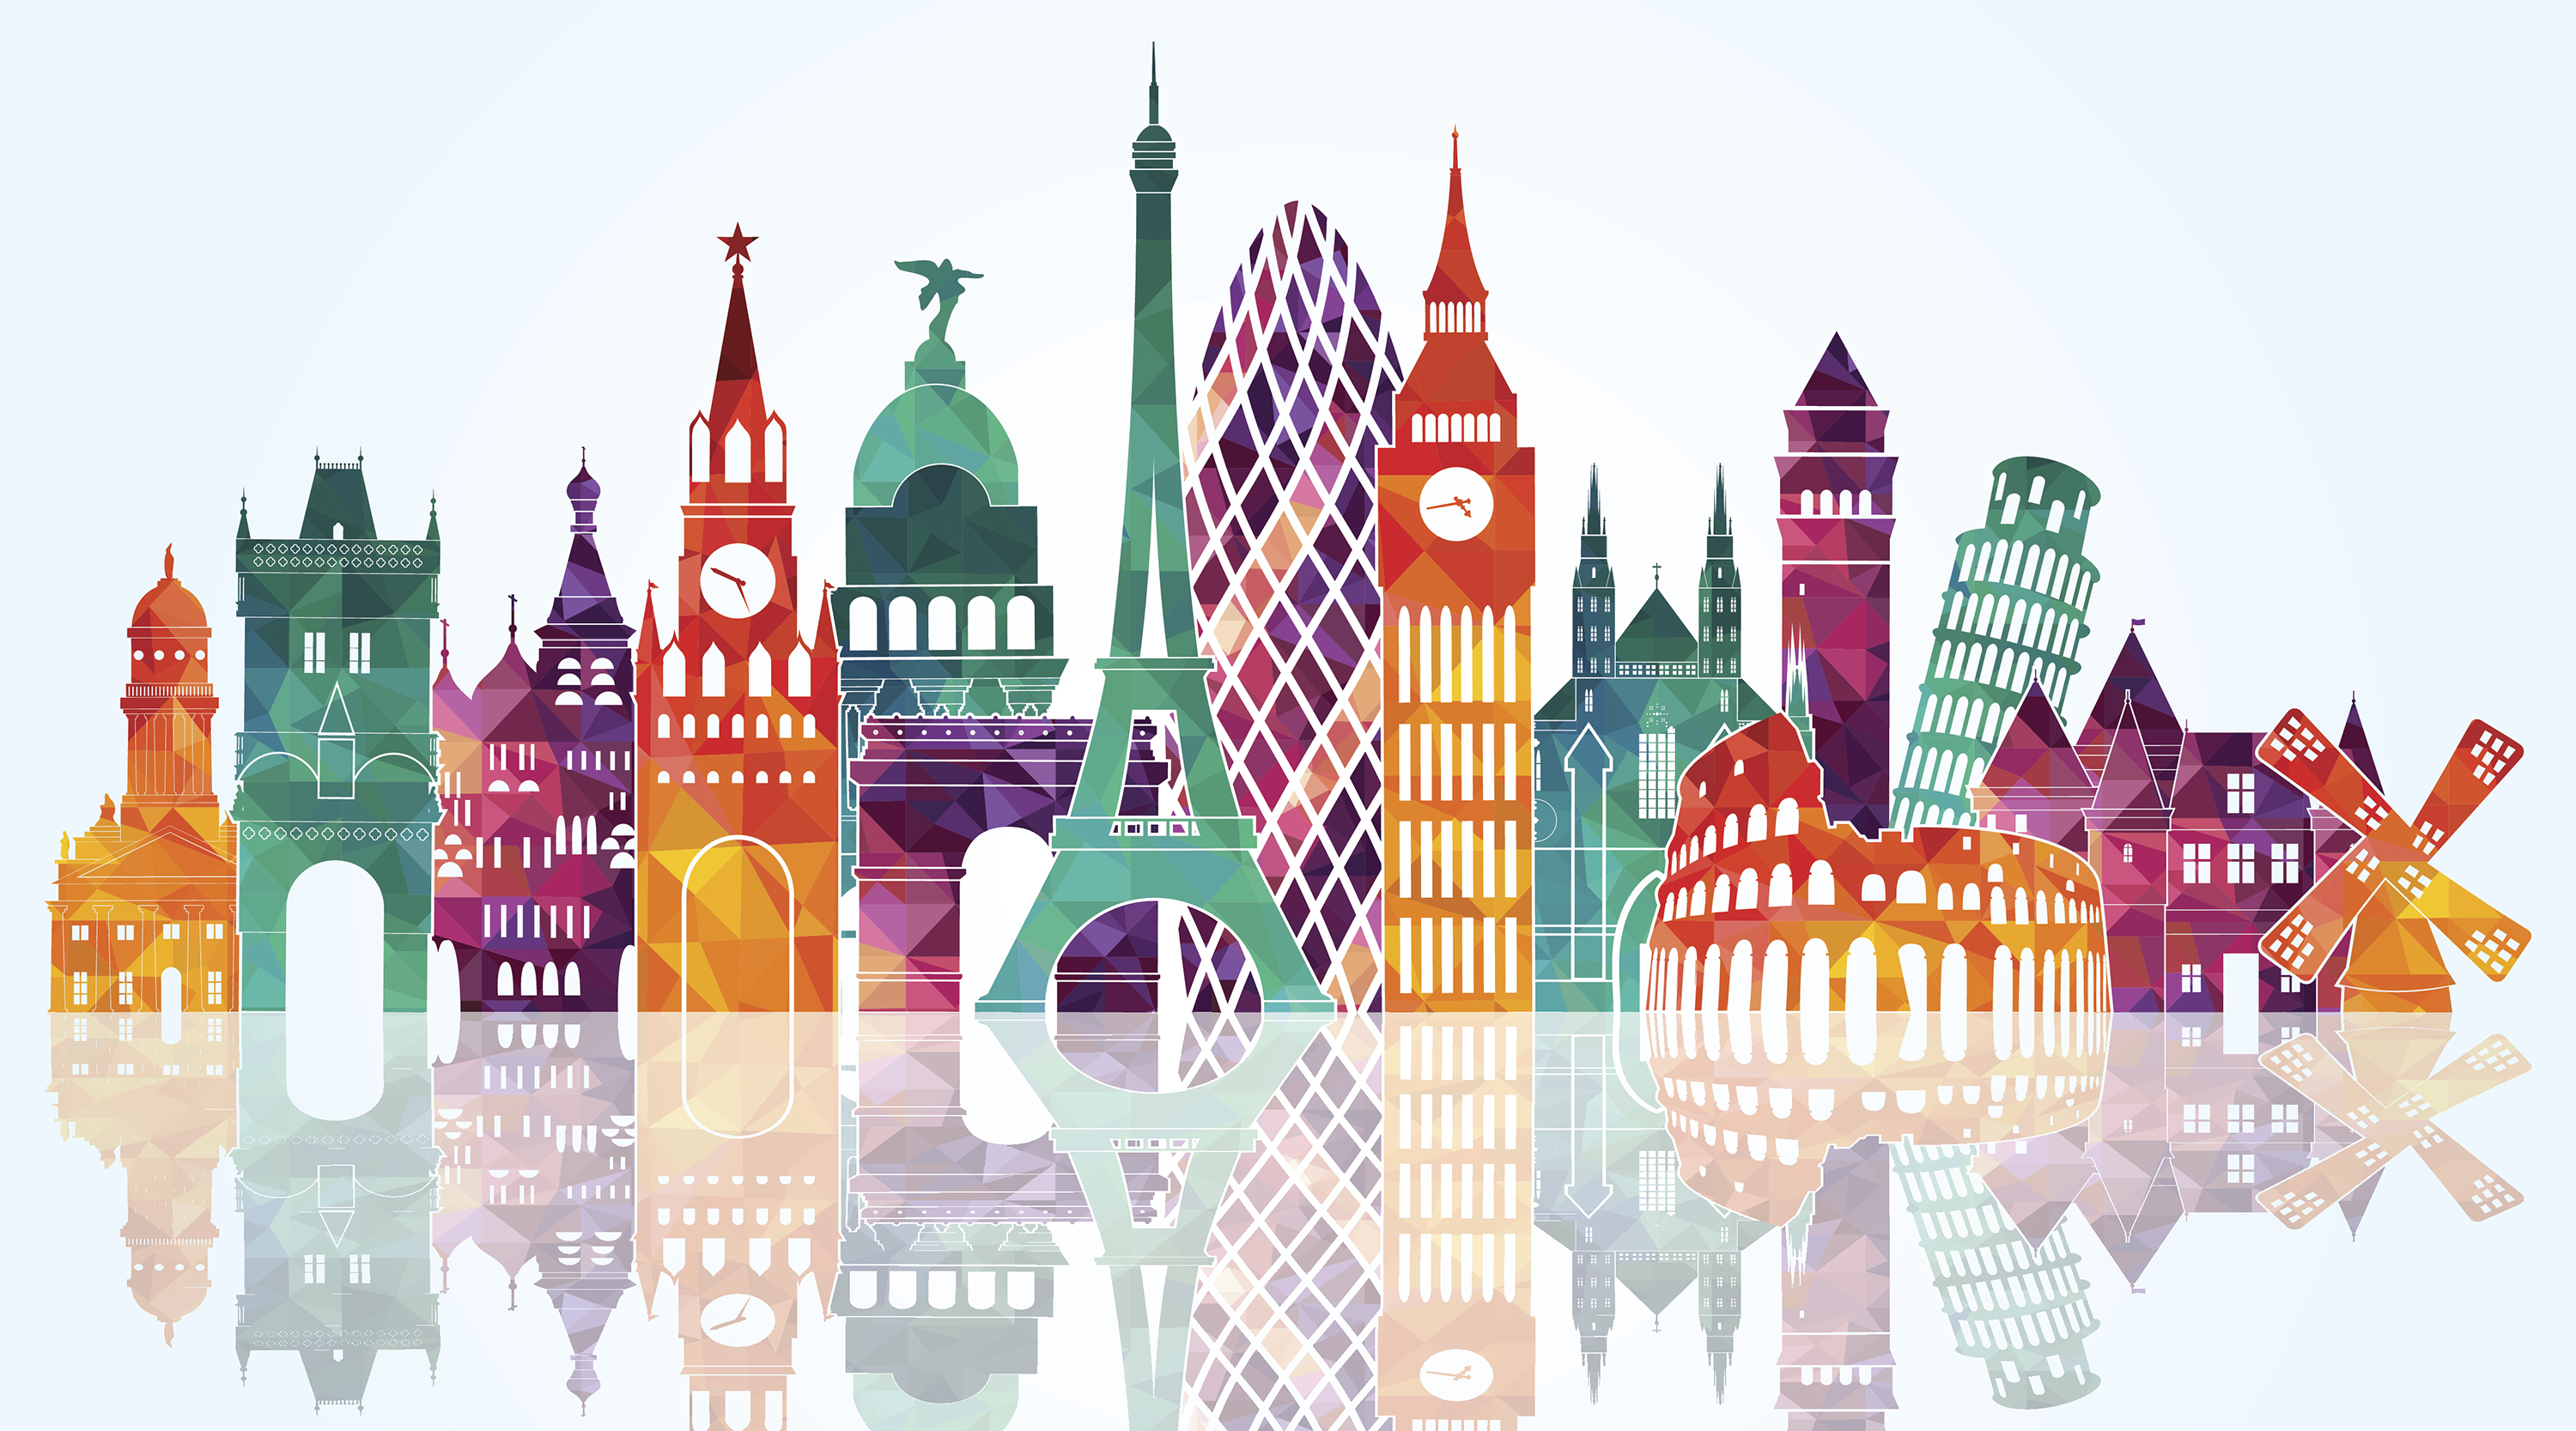 A cartoon representation of a cityscape filled with famous buildings from across Europe